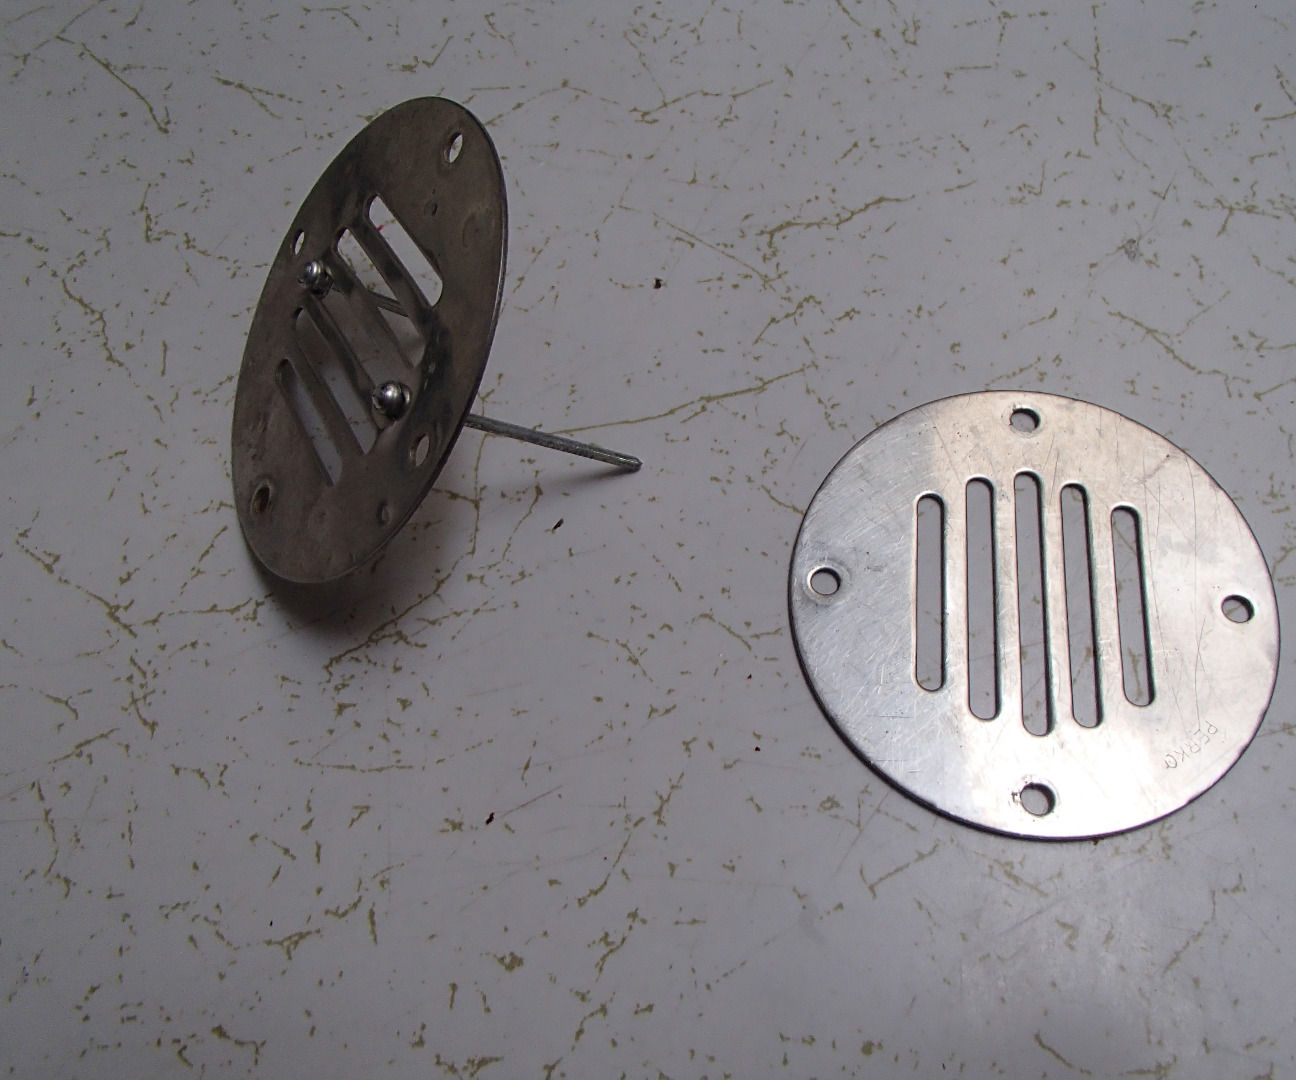 Removable Drain Covers for Sailboat Cockpit Drains